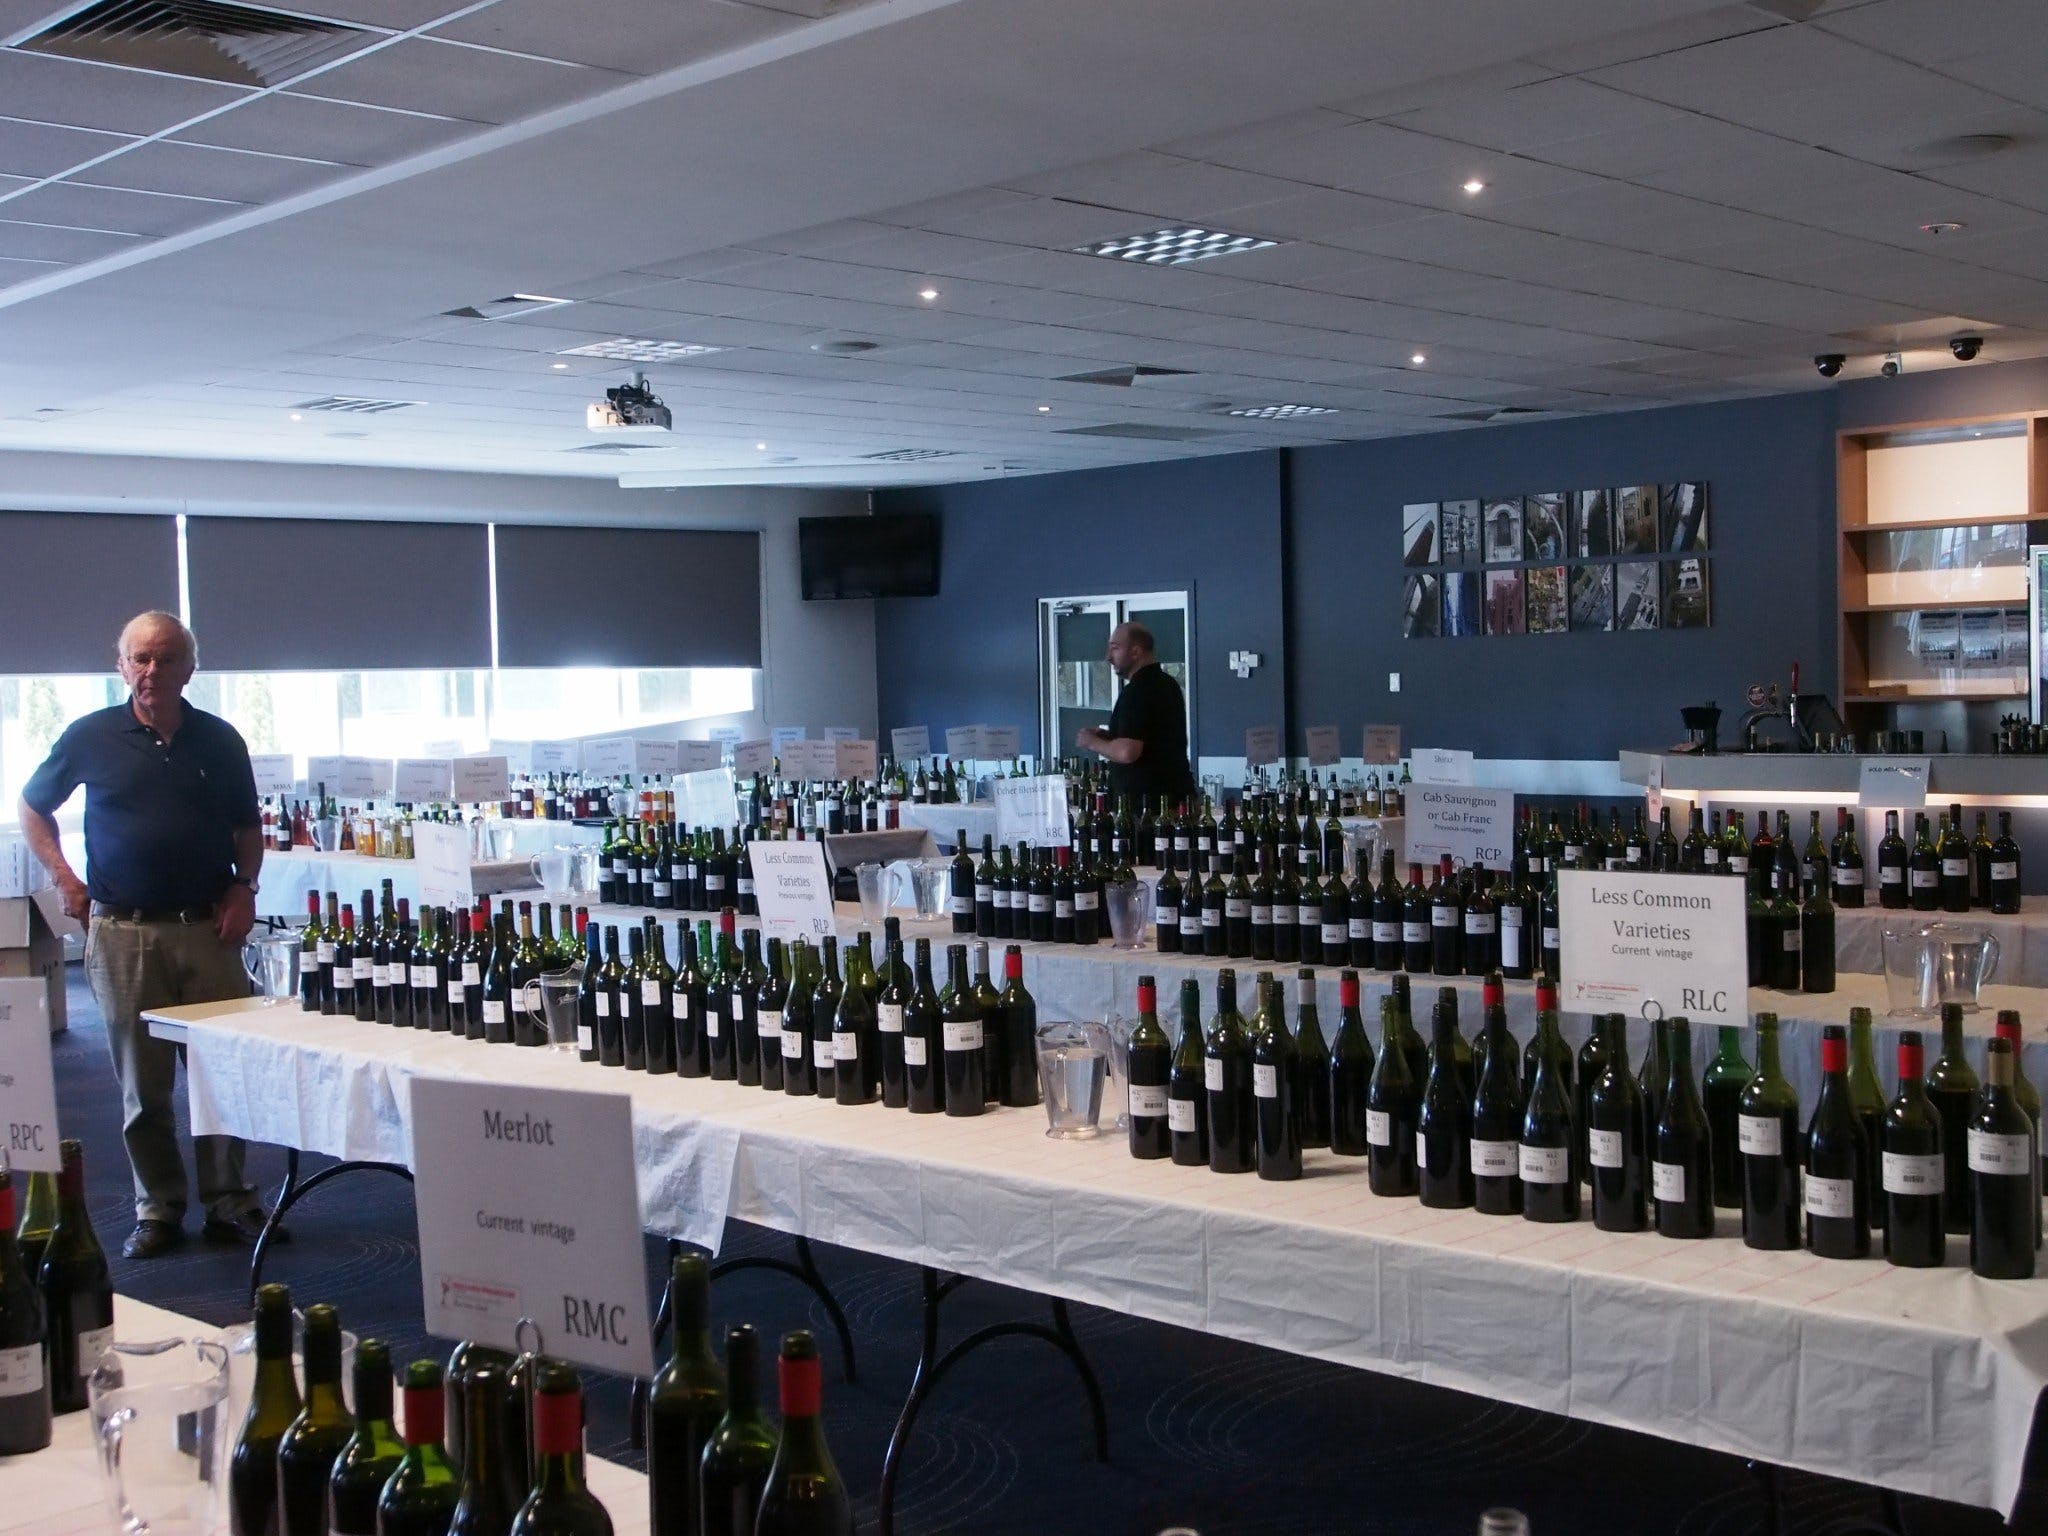 Eltham and District Wine Guild Annual Wine Show - 51st Annual Show - Accommodation Bookings